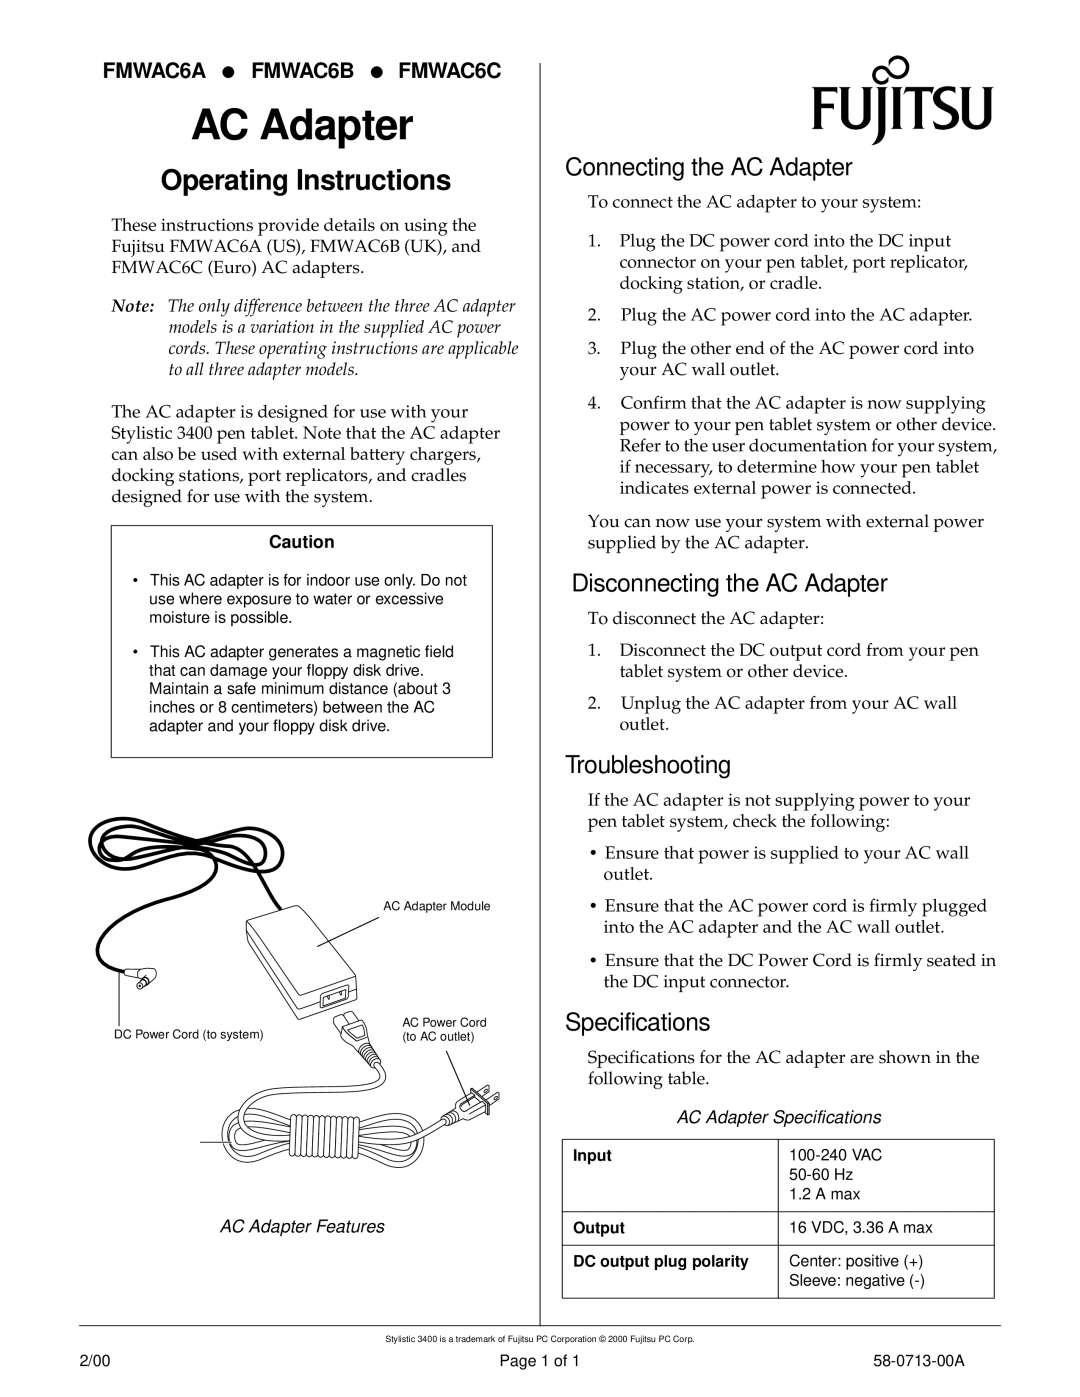 Fujitsu Siemens Computers FMWAC6B specifications Operating Instructions, Connecting the AC Adapter, Troubleshooting 